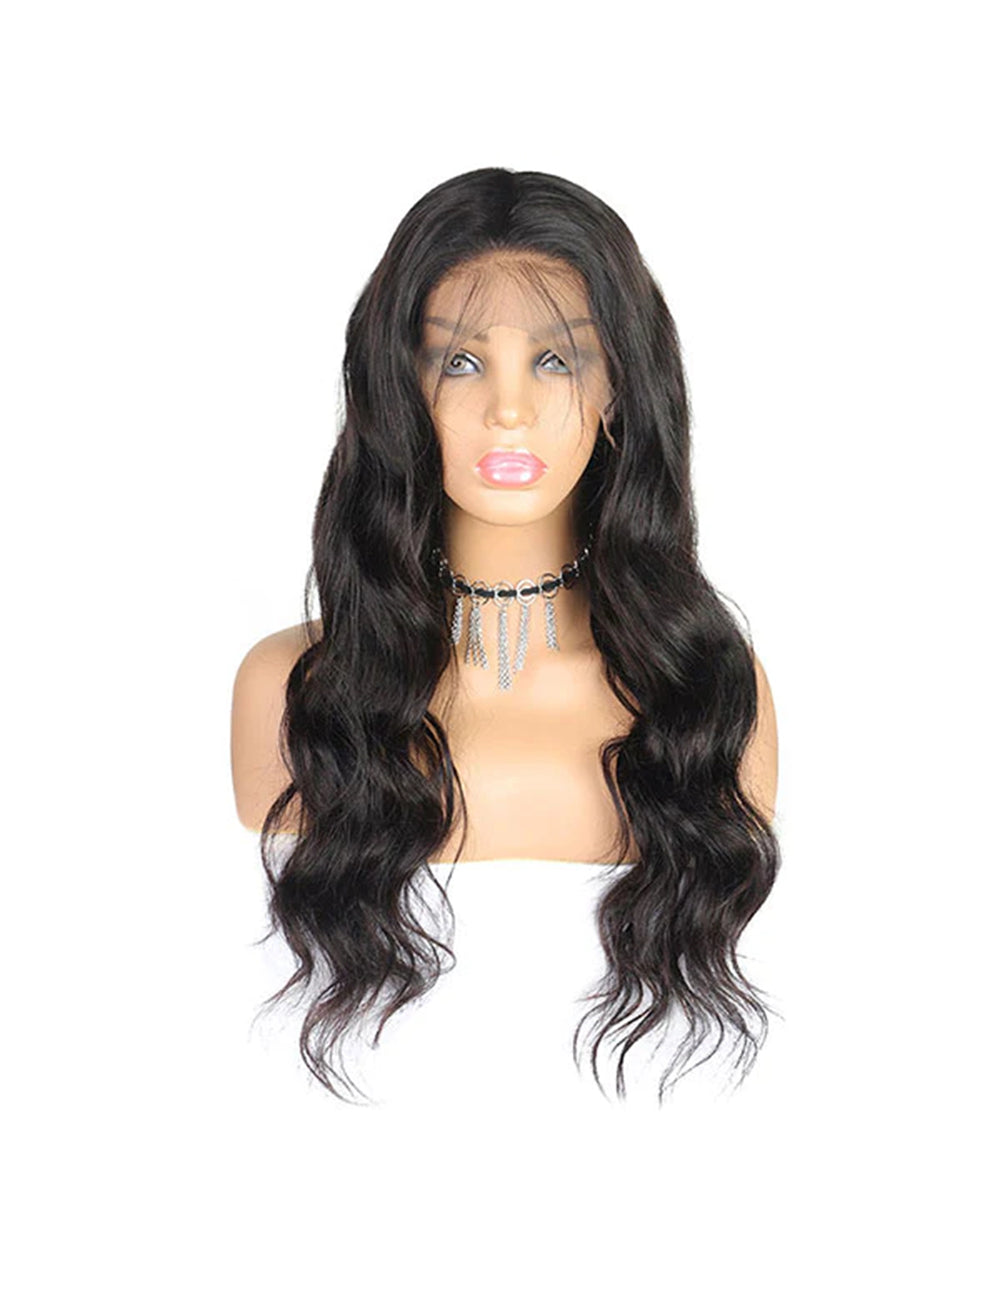 Body Wave Lace Front Wig Indian Human Hair Wig 13x4 Lace Frontal Wigs 30Inch Hair